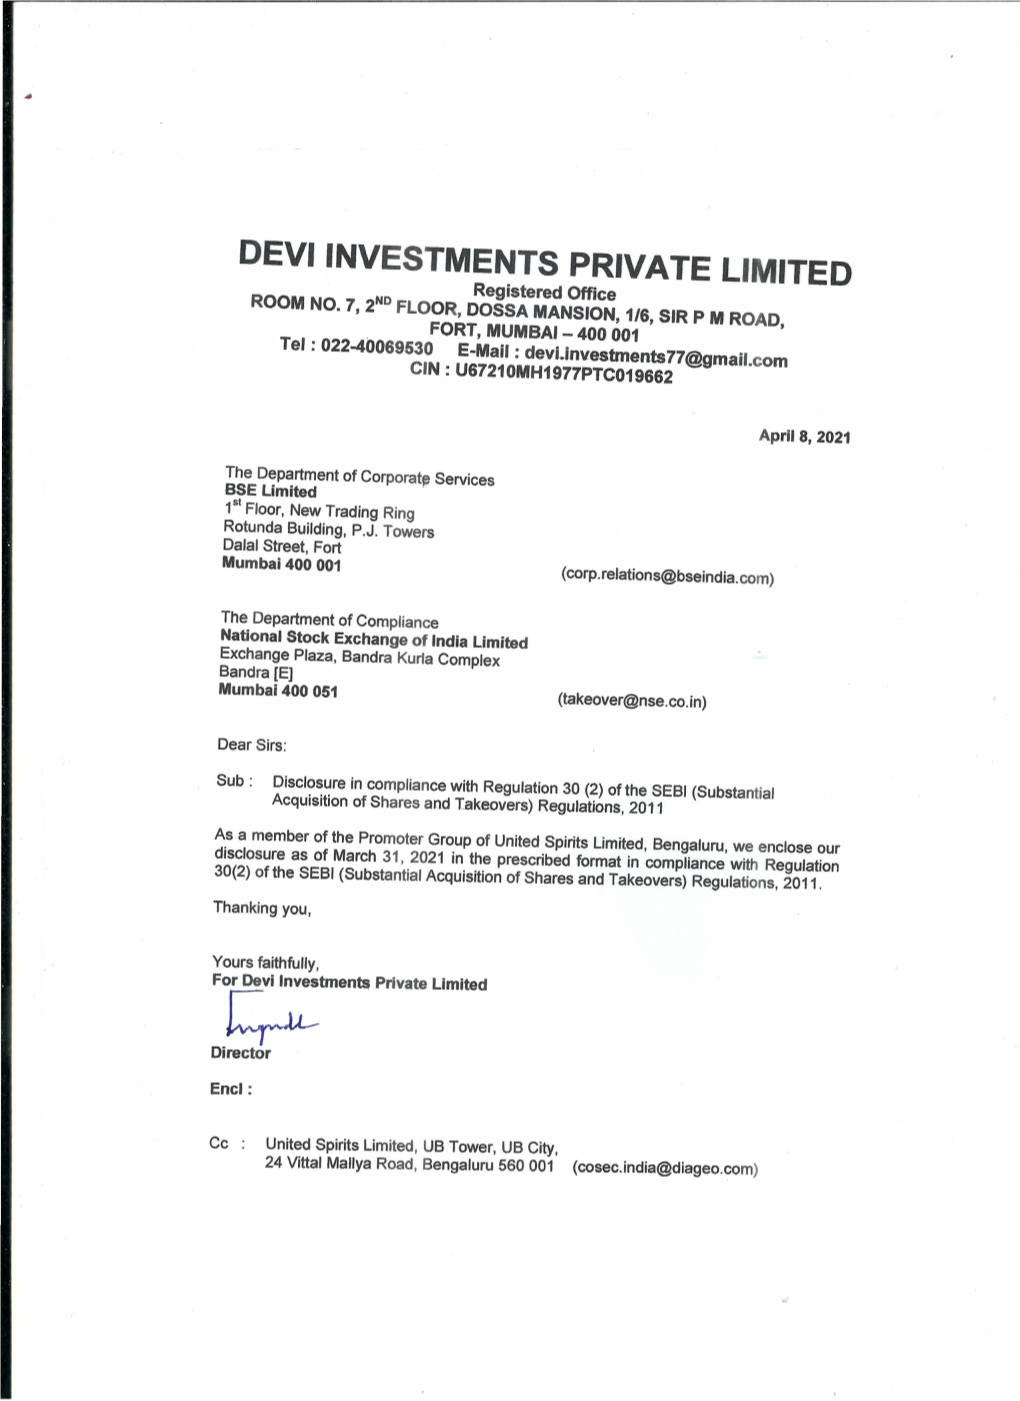 Deviinvestments Private Limited